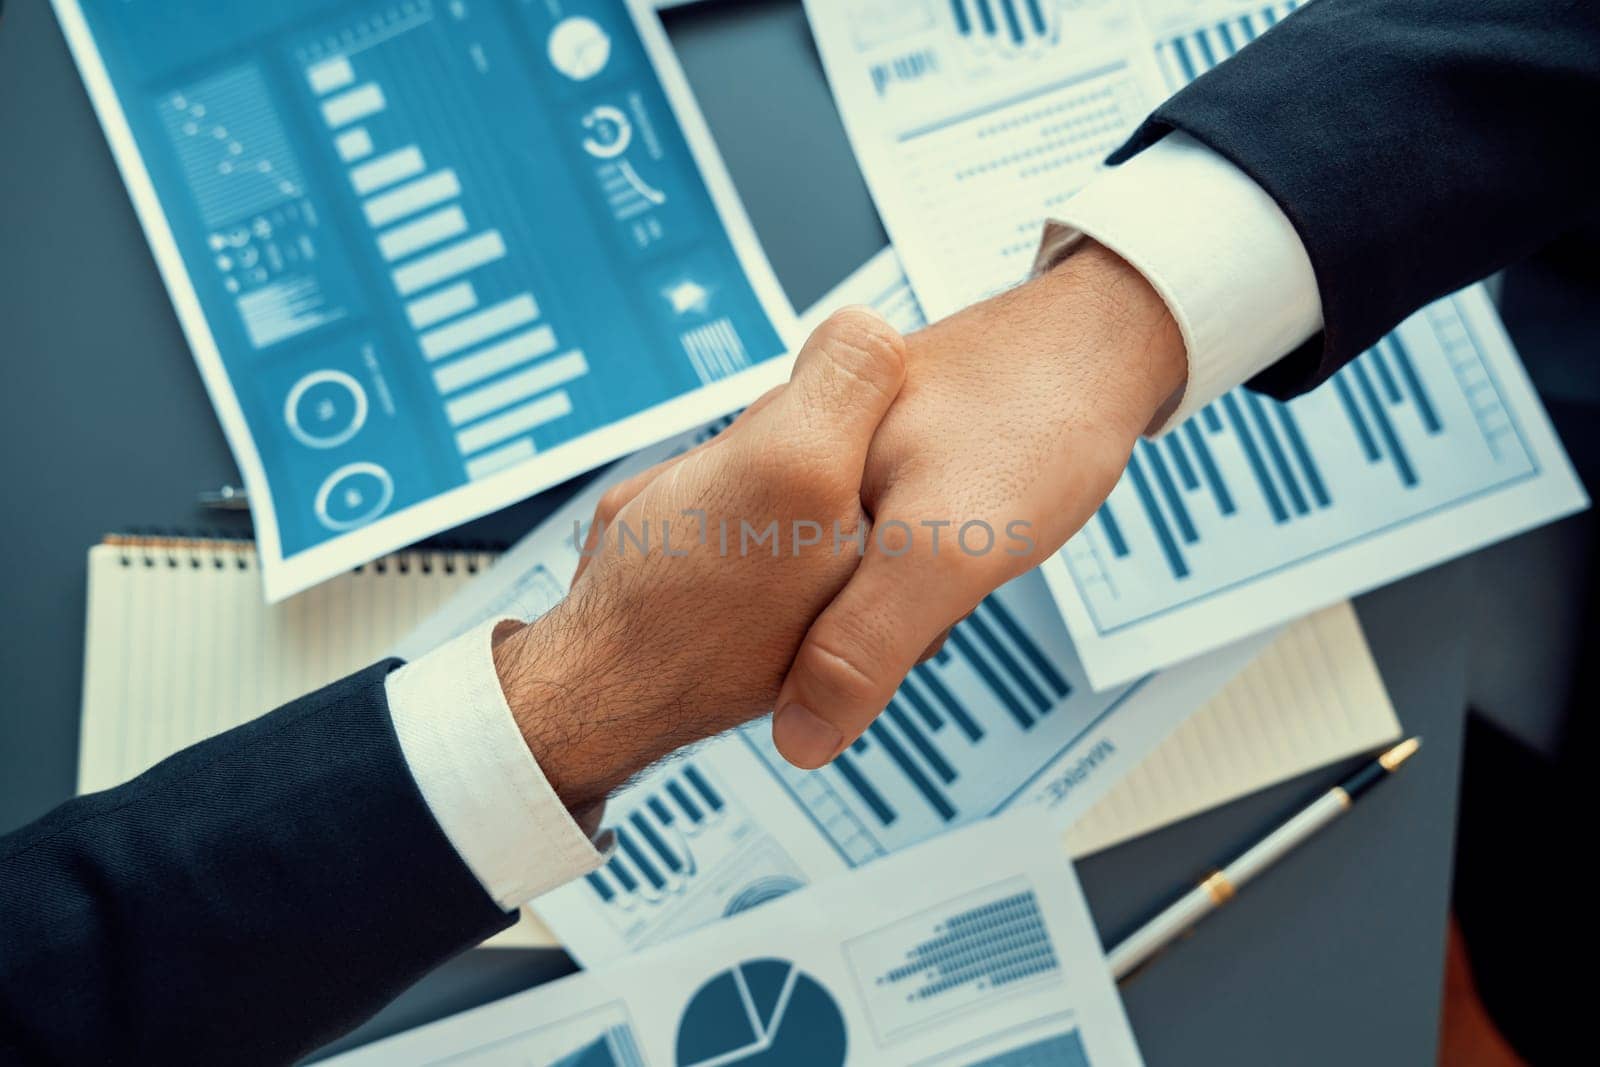 Top view professional businessman shaking hands over desk in modern office after successfully analyzing pile of dashboard data paper as teamwork and integrity handshake in workplace concept. fervent